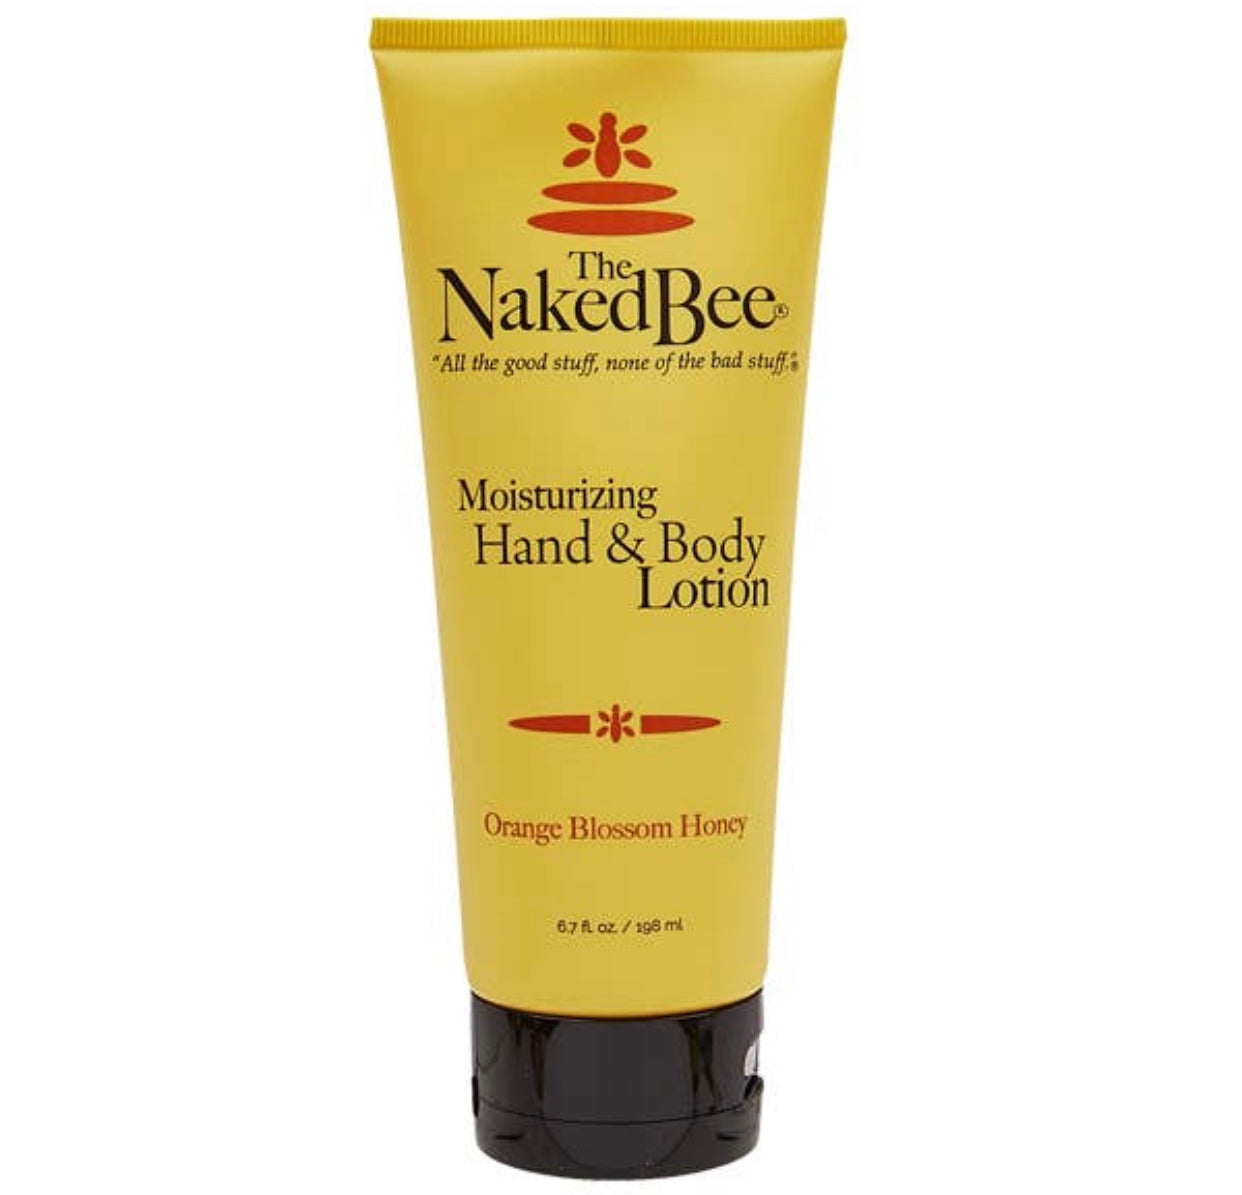 6.7 oz. Hand & Body Lotion, The Naked Bee